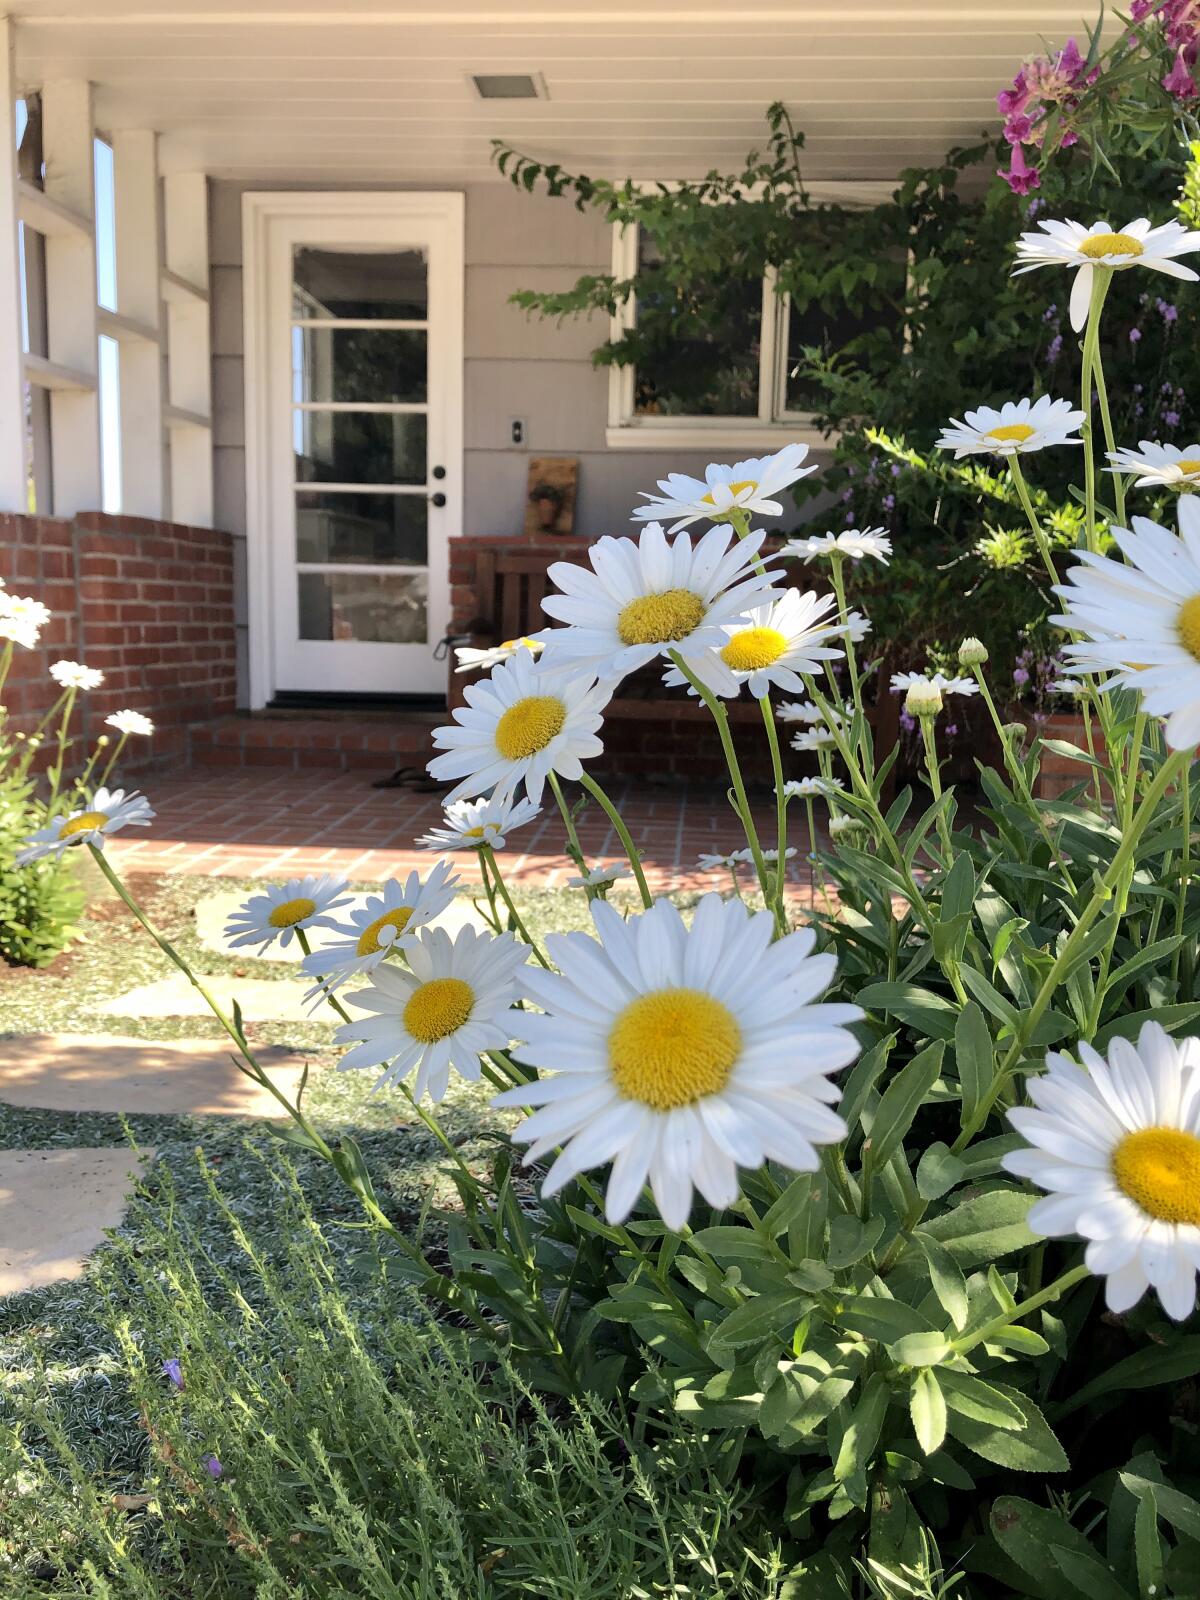 Clusters of cheery Shasta daisies greet visitors coming up the pathway to the porch.